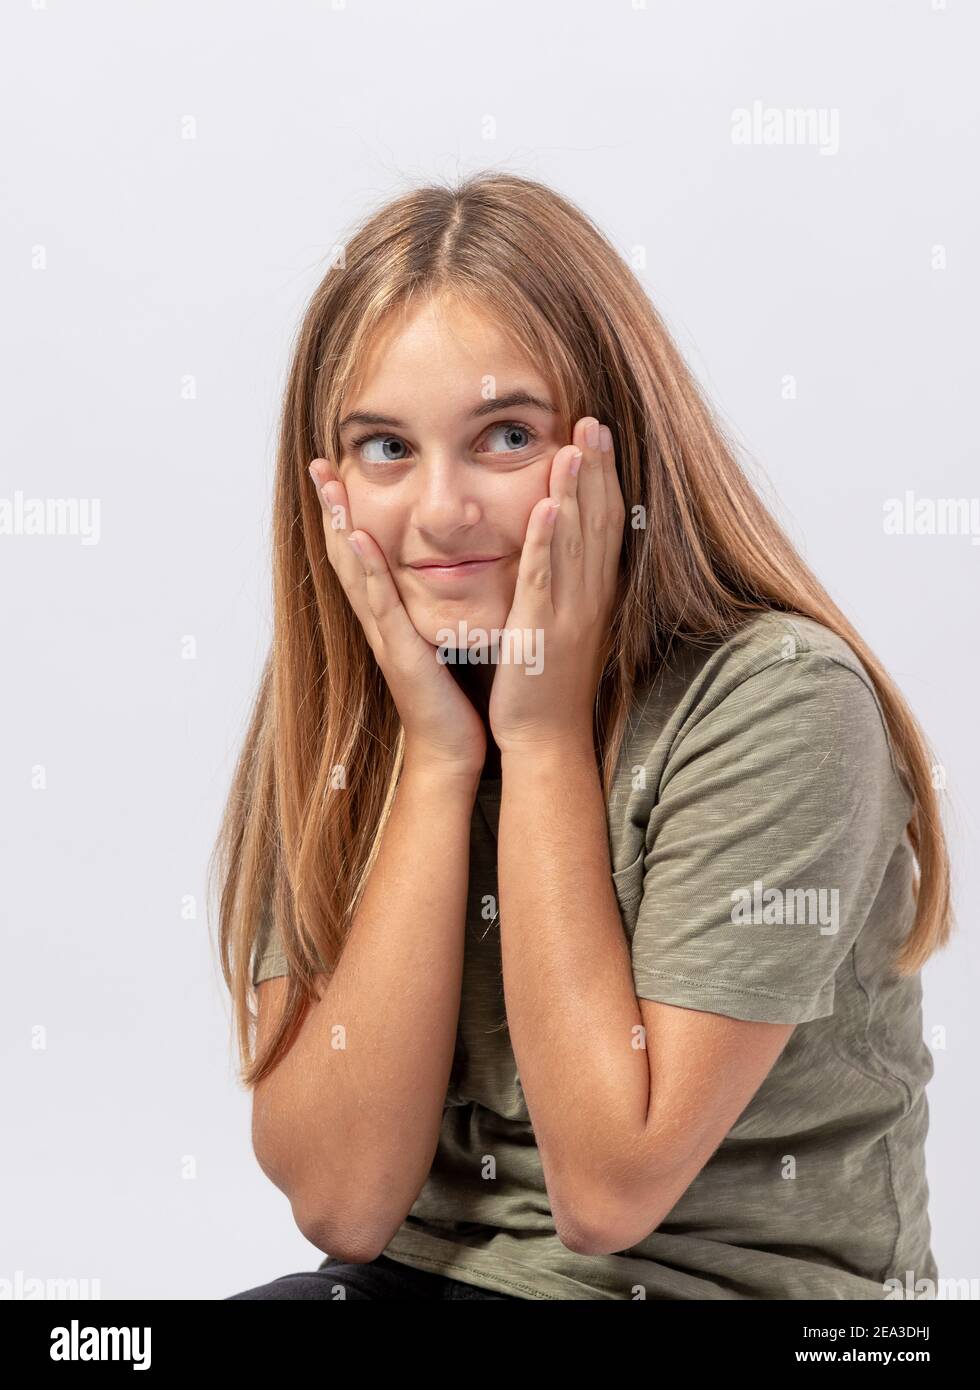 Young smiling girl looks to the side with sly and surprised expression Stock Photo